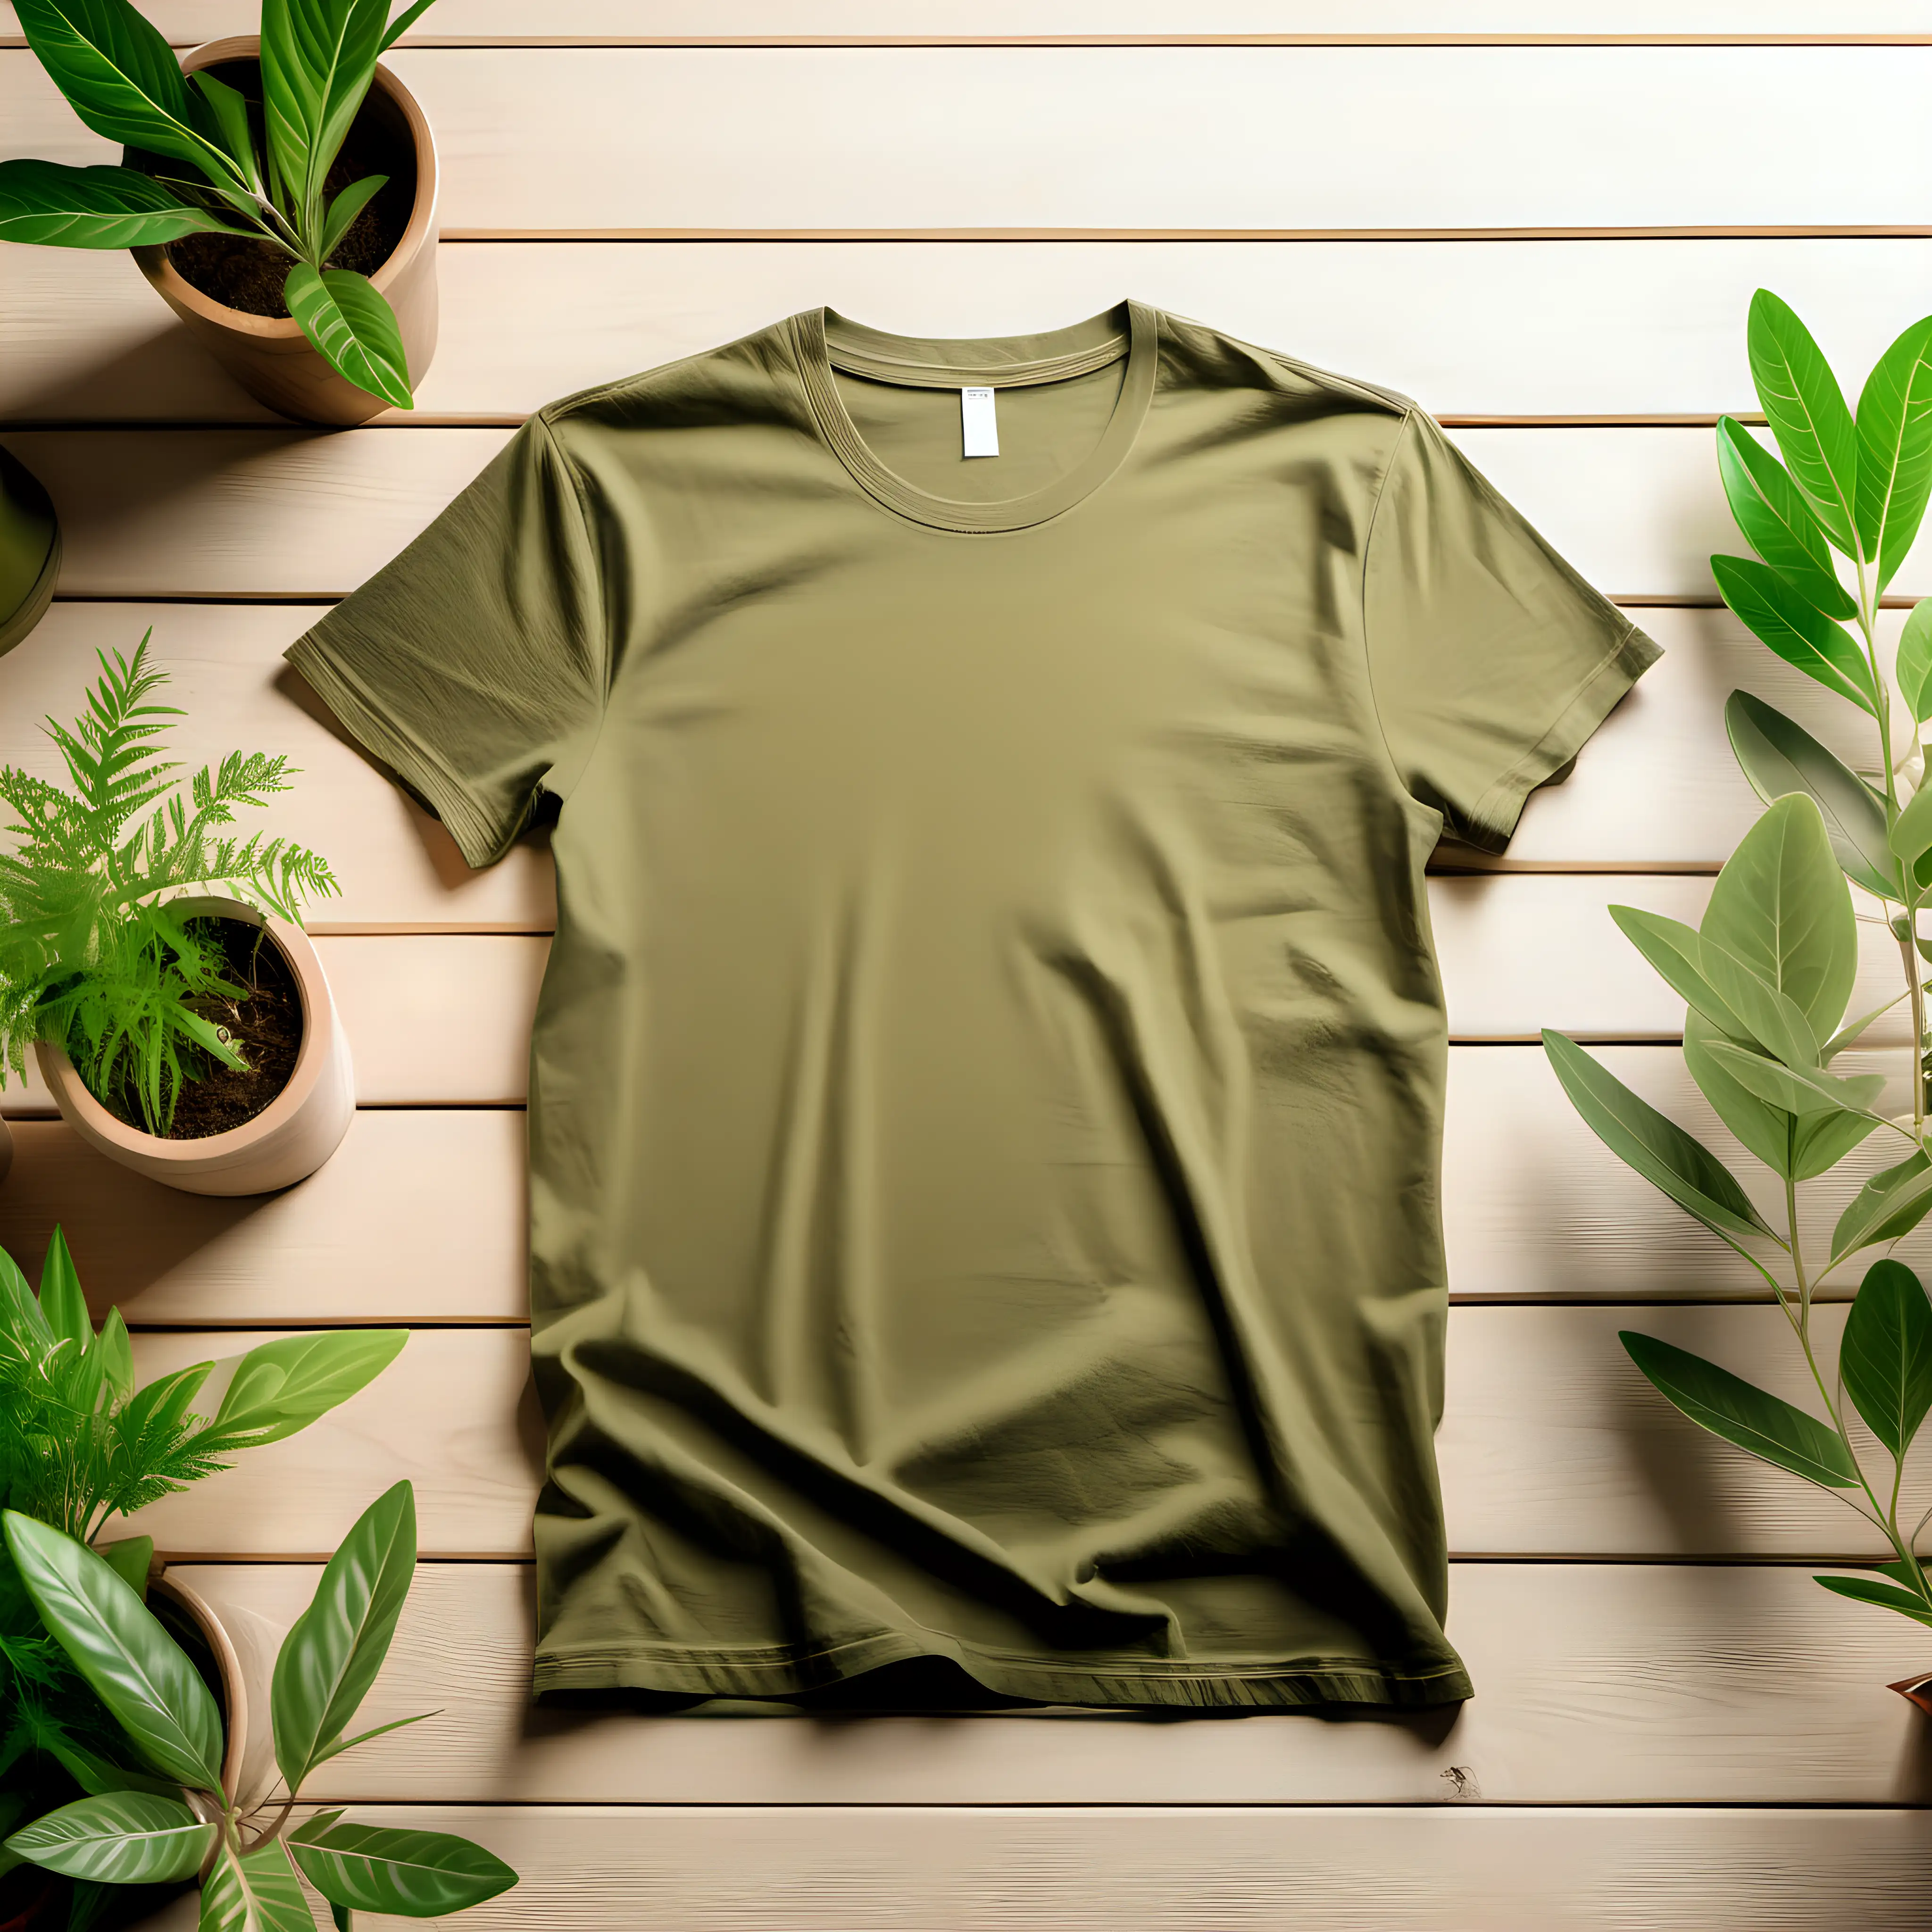 completely blank olive tshirt laying on a light wooden table with plants framing it, in bright light as a mock up